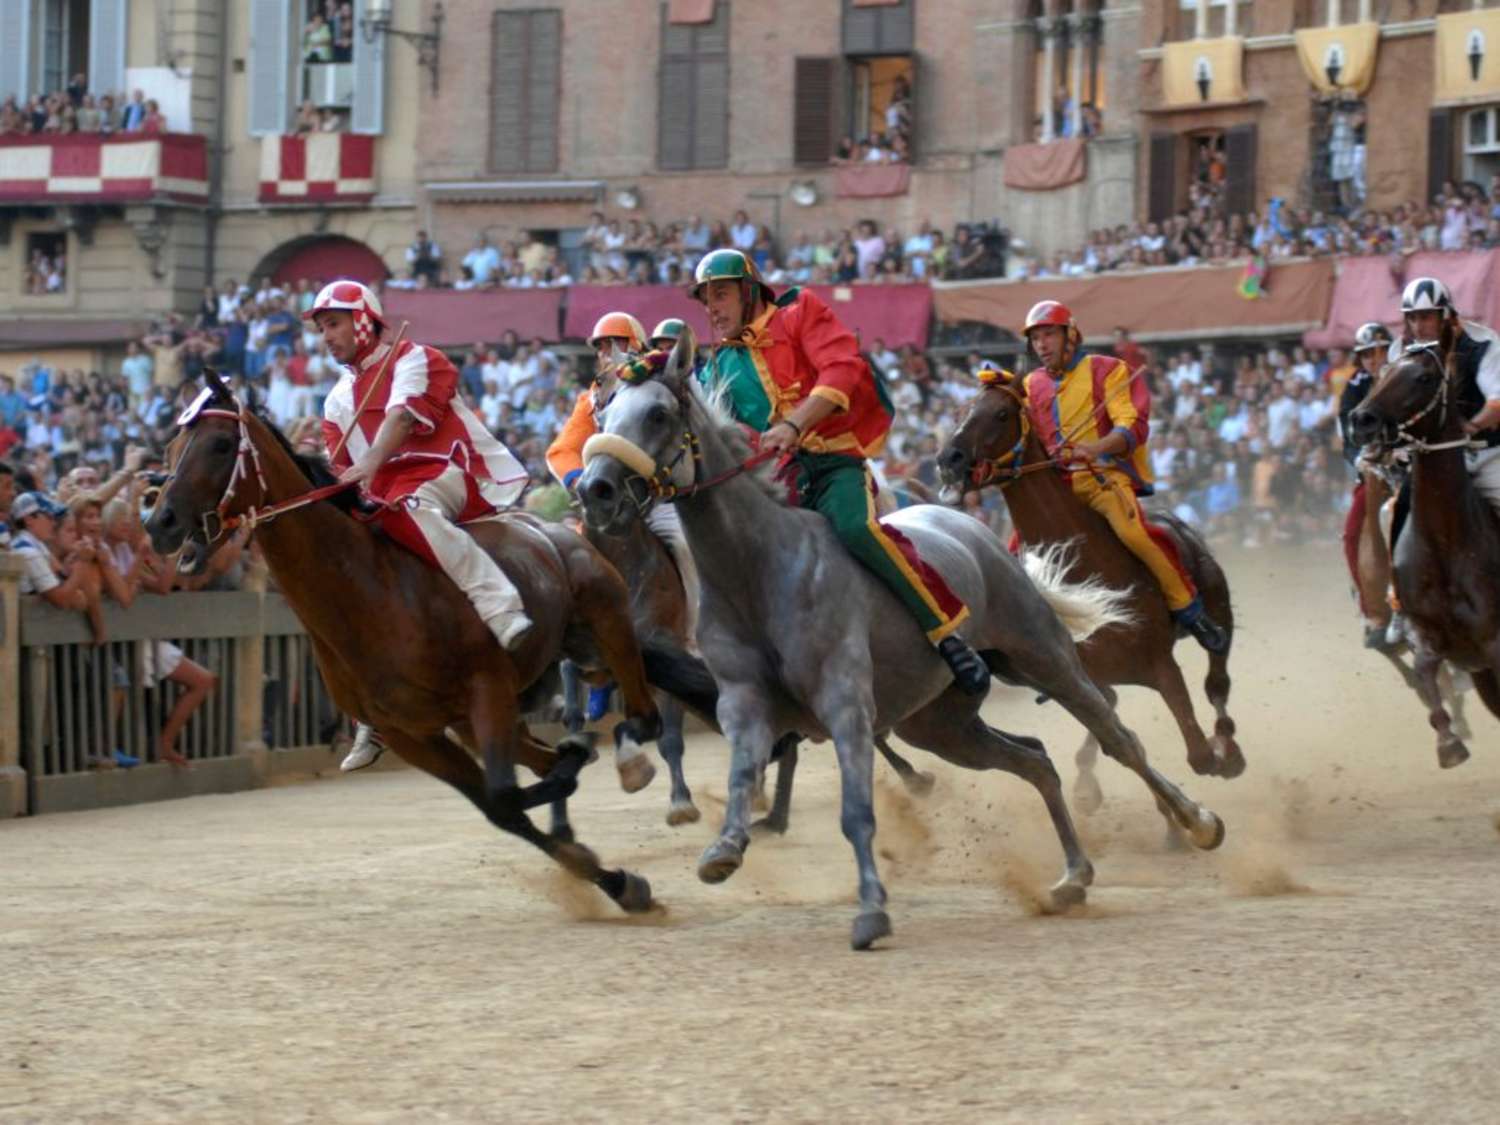 A view of horse racers in Siena, Italy